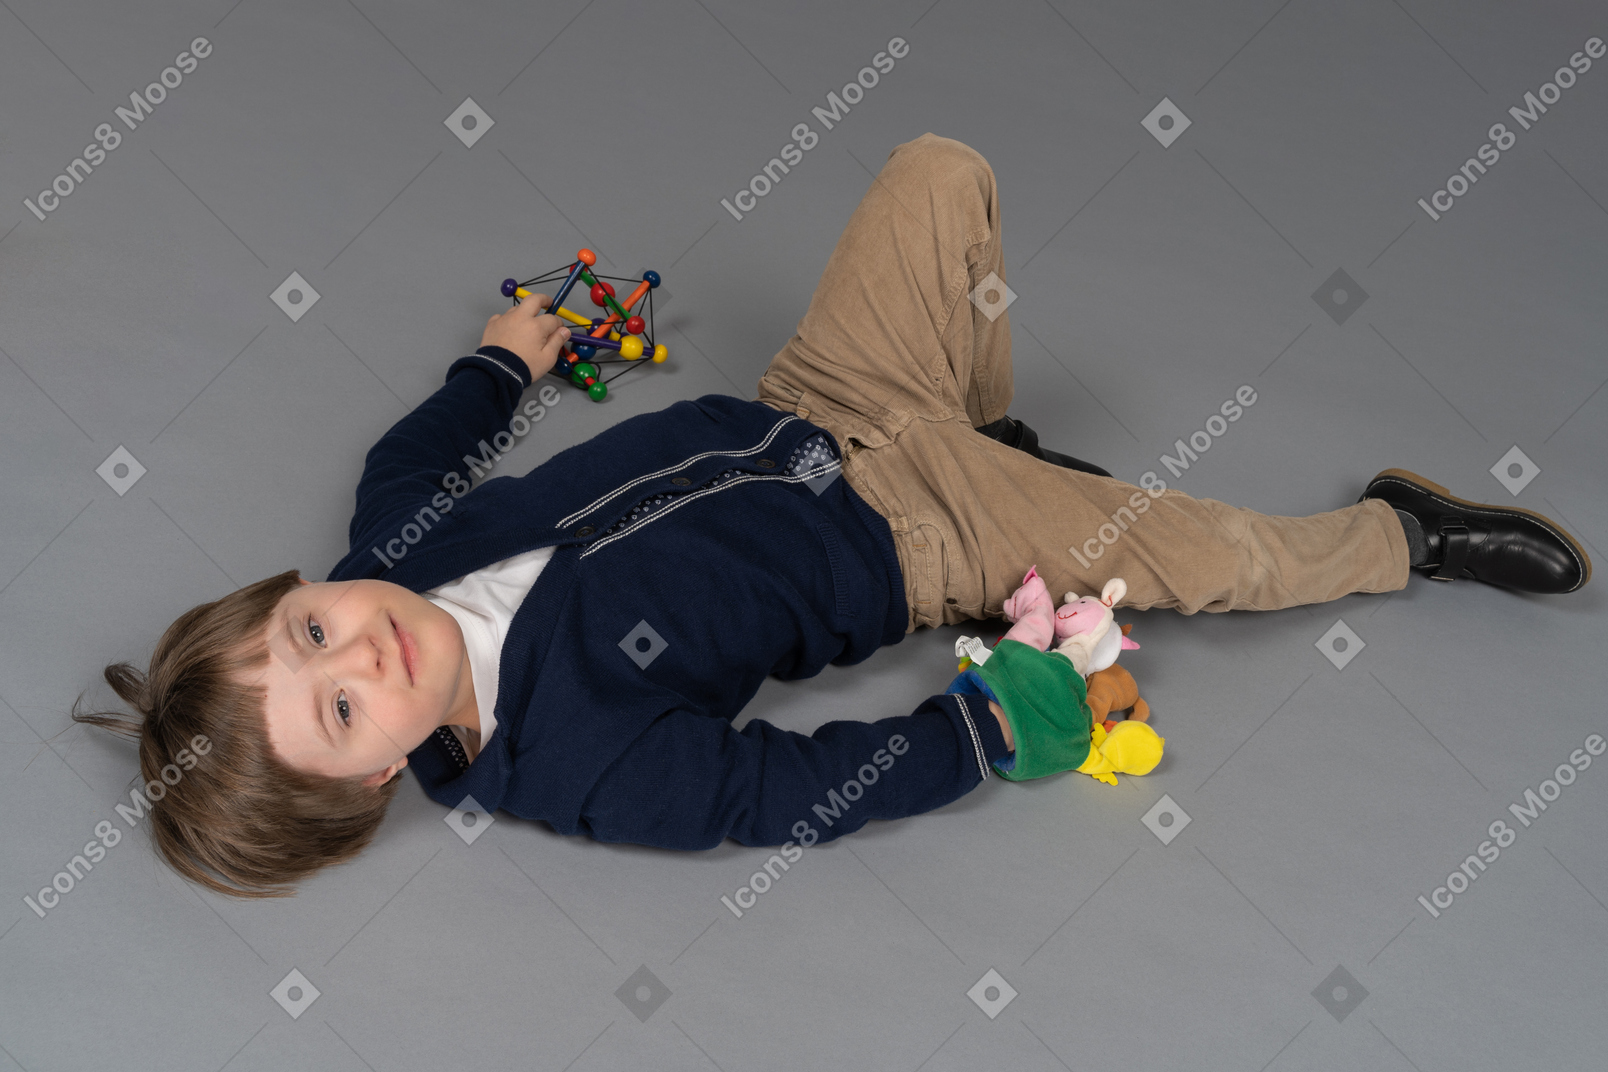 Cheerful little boy lying down with toys